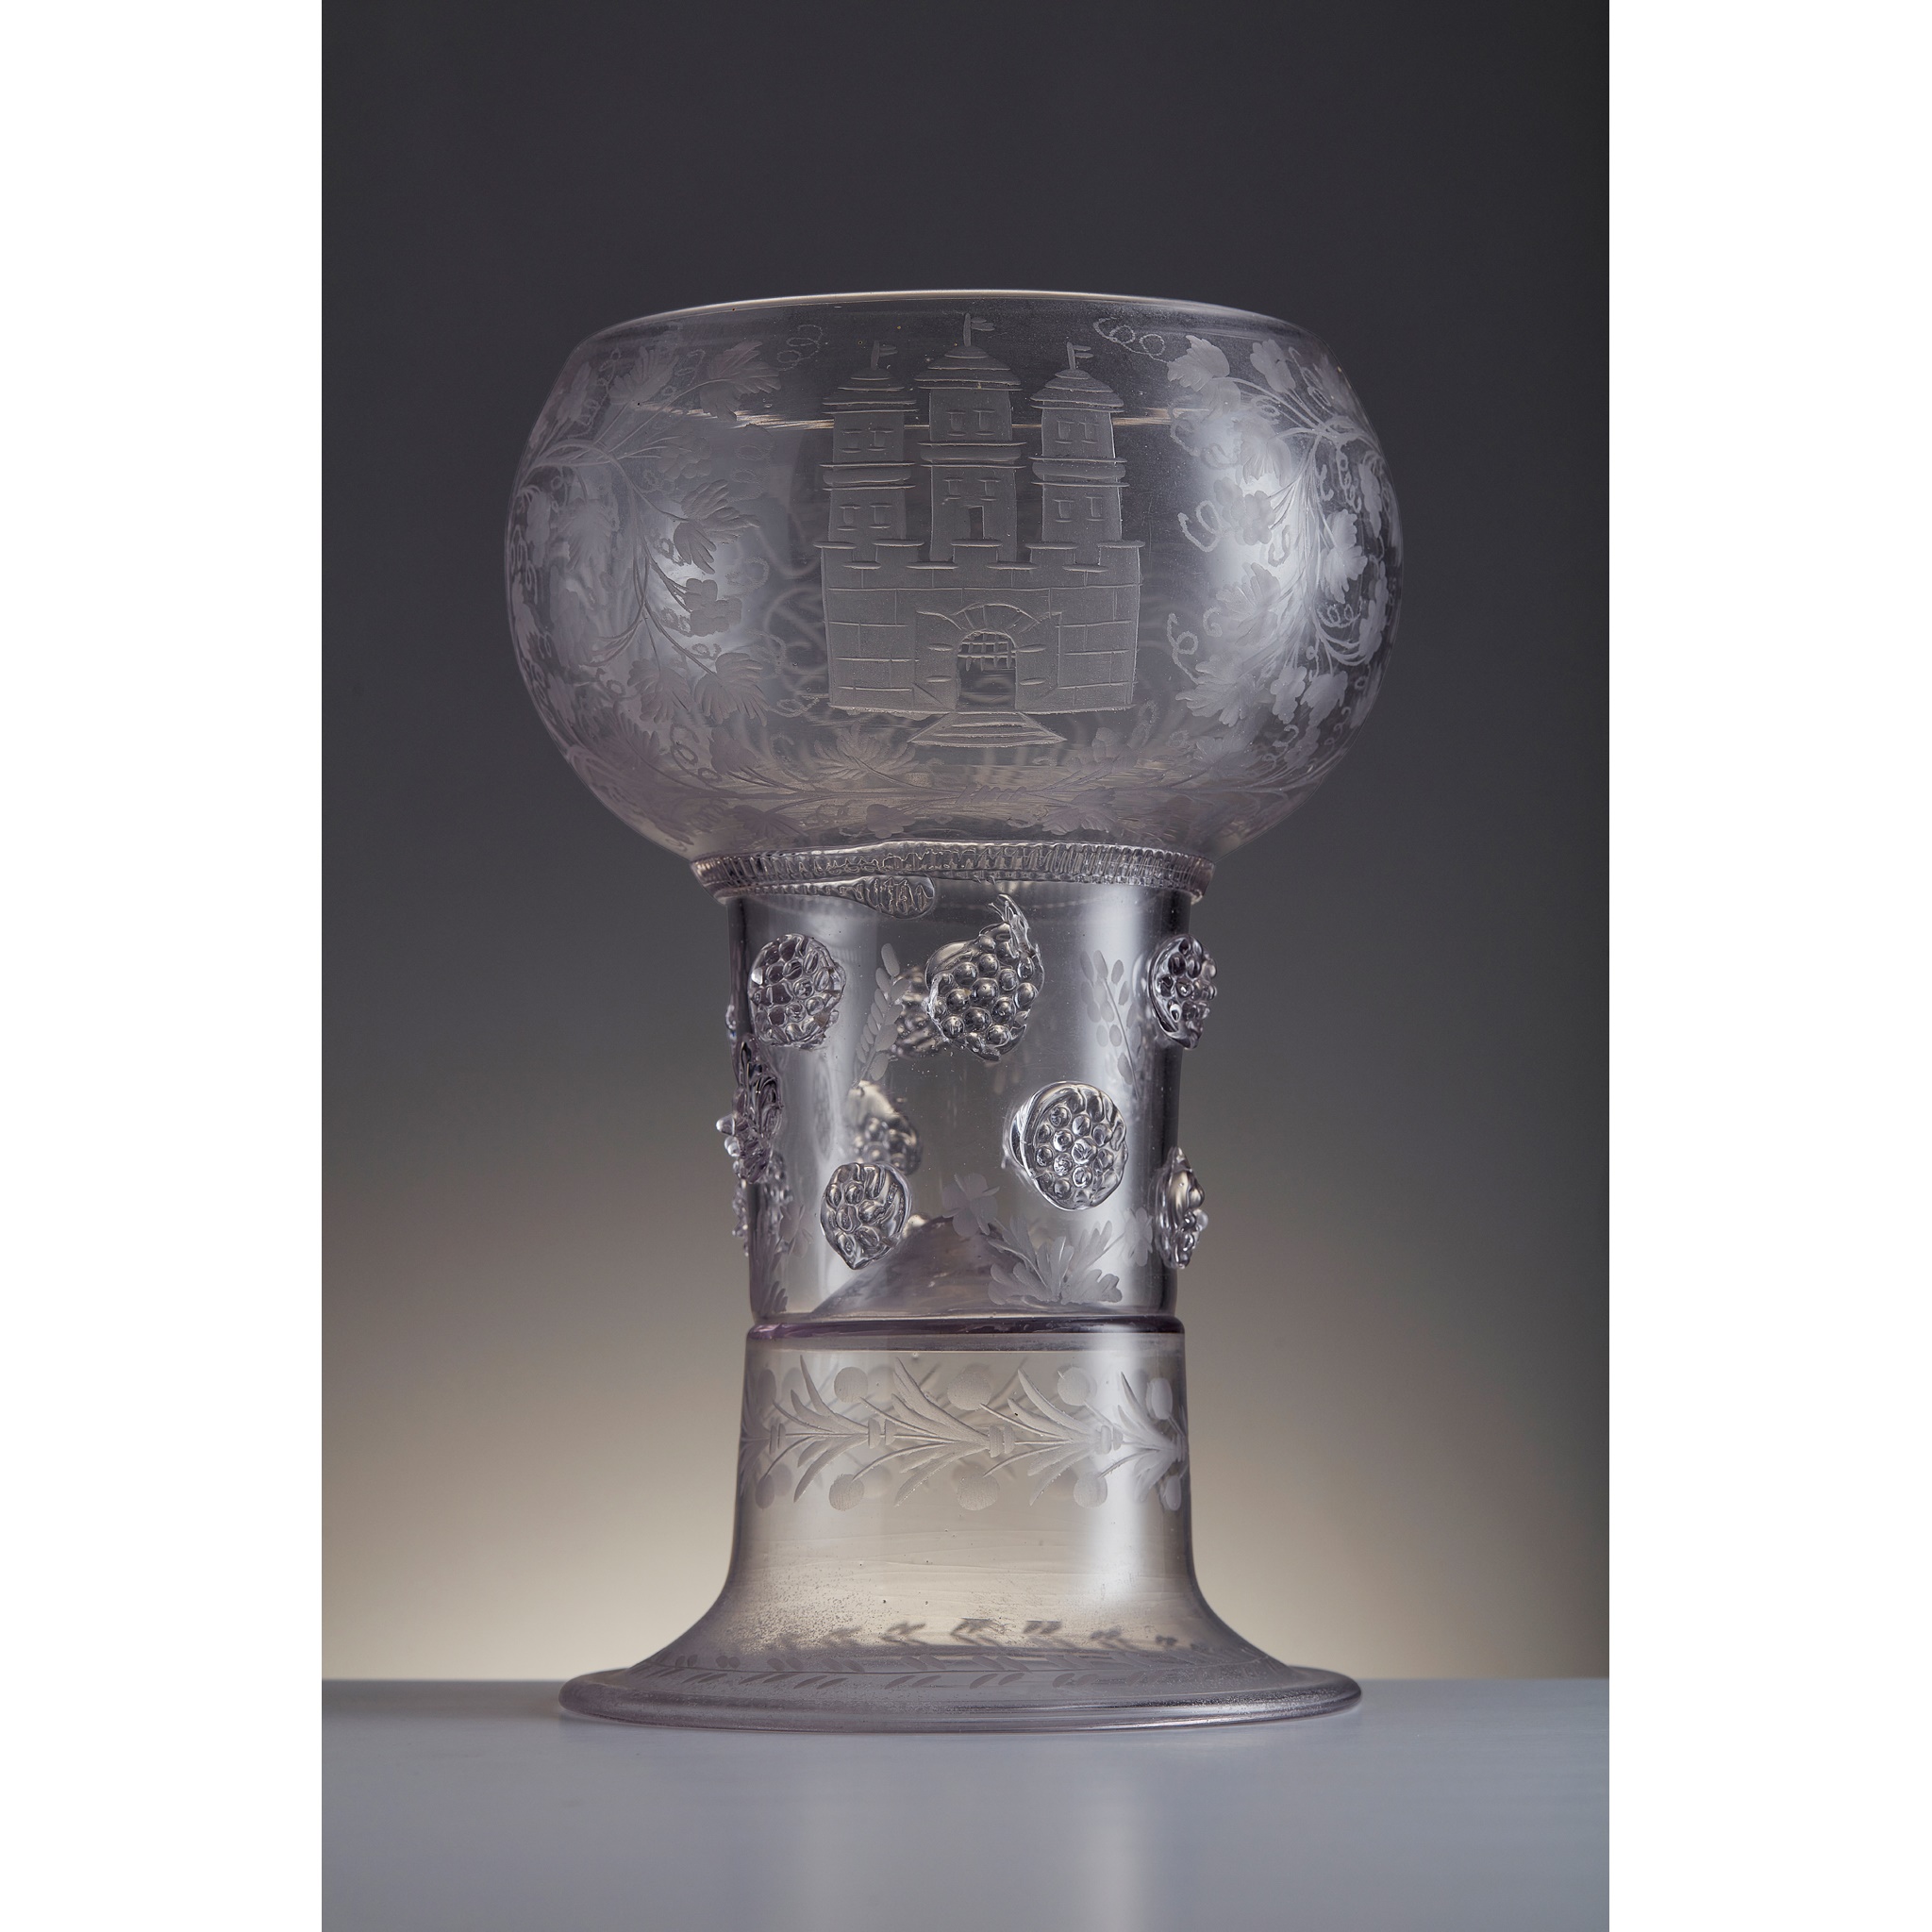 LARGE CLEAR GLASS ROEMER BEARING THE BREADALBANE CYPHER DUTCH OR GERMAN, LATE 17TH / EARLY 18TH - Image 4 of 4